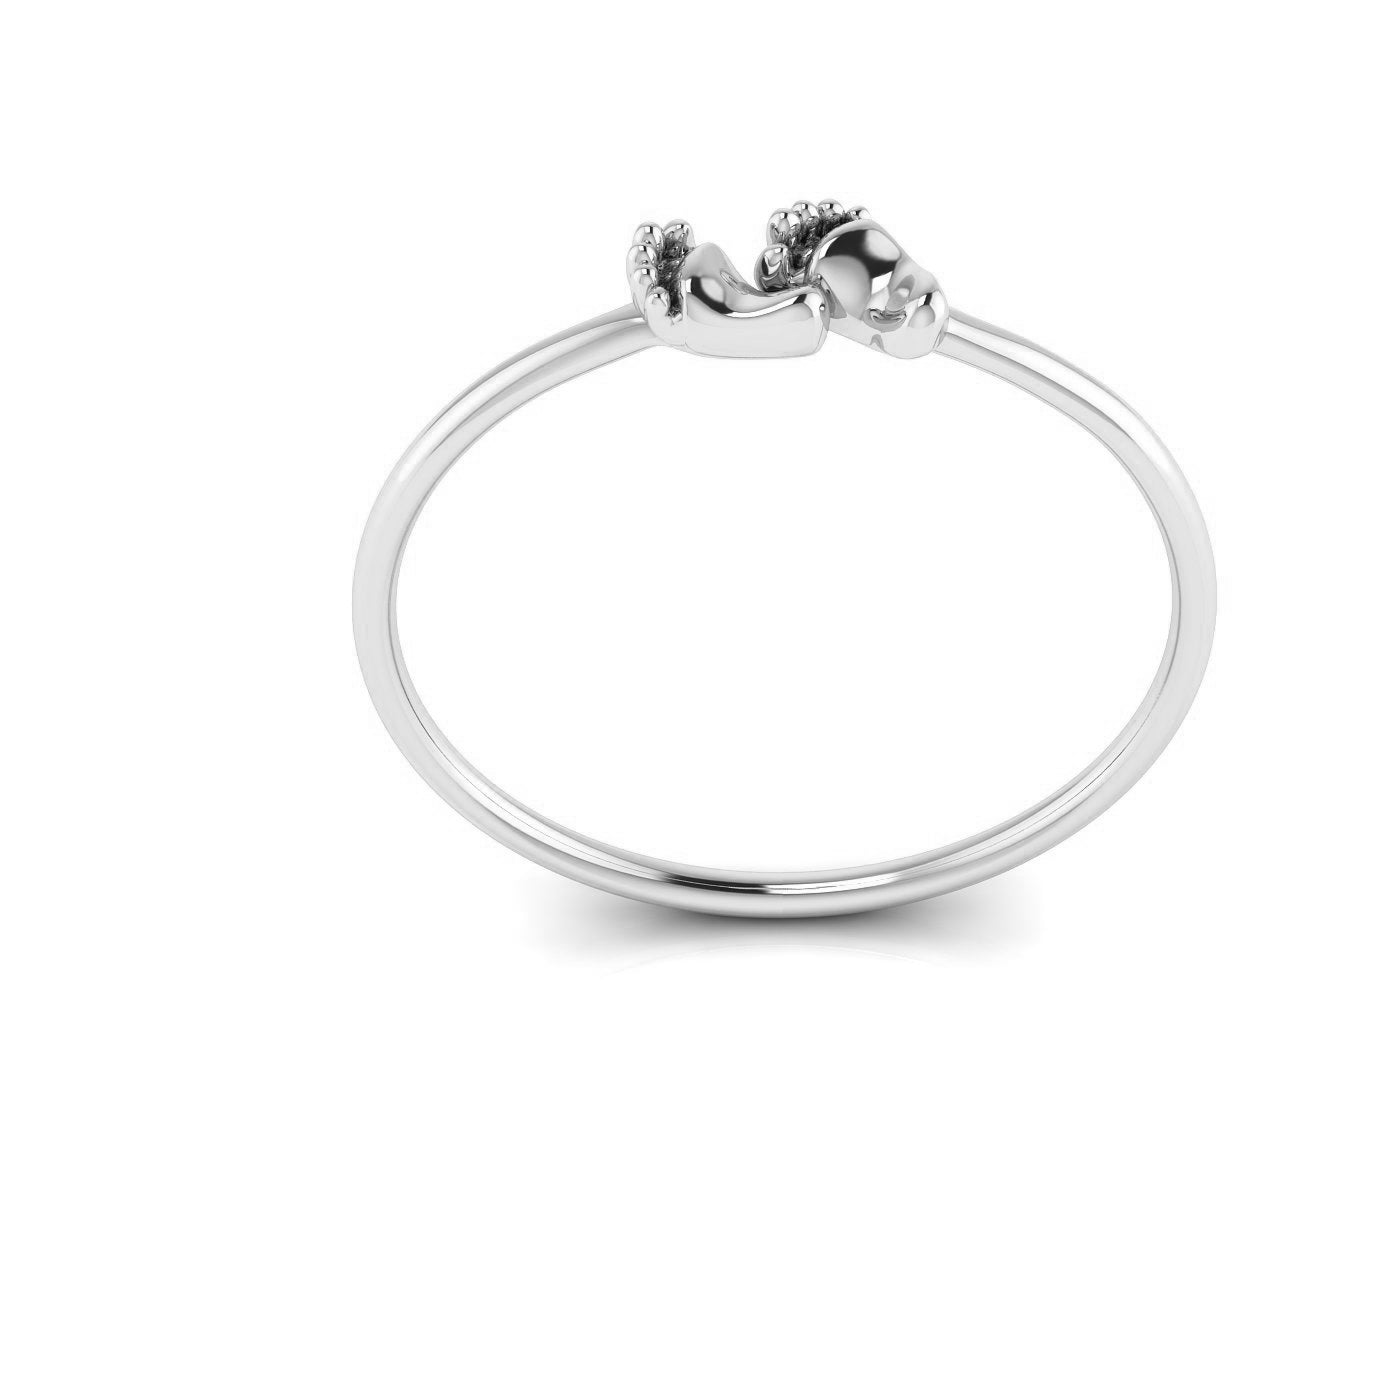 Pour La Vie - 18K White Gold Plated Silver Roof of Life Bangle